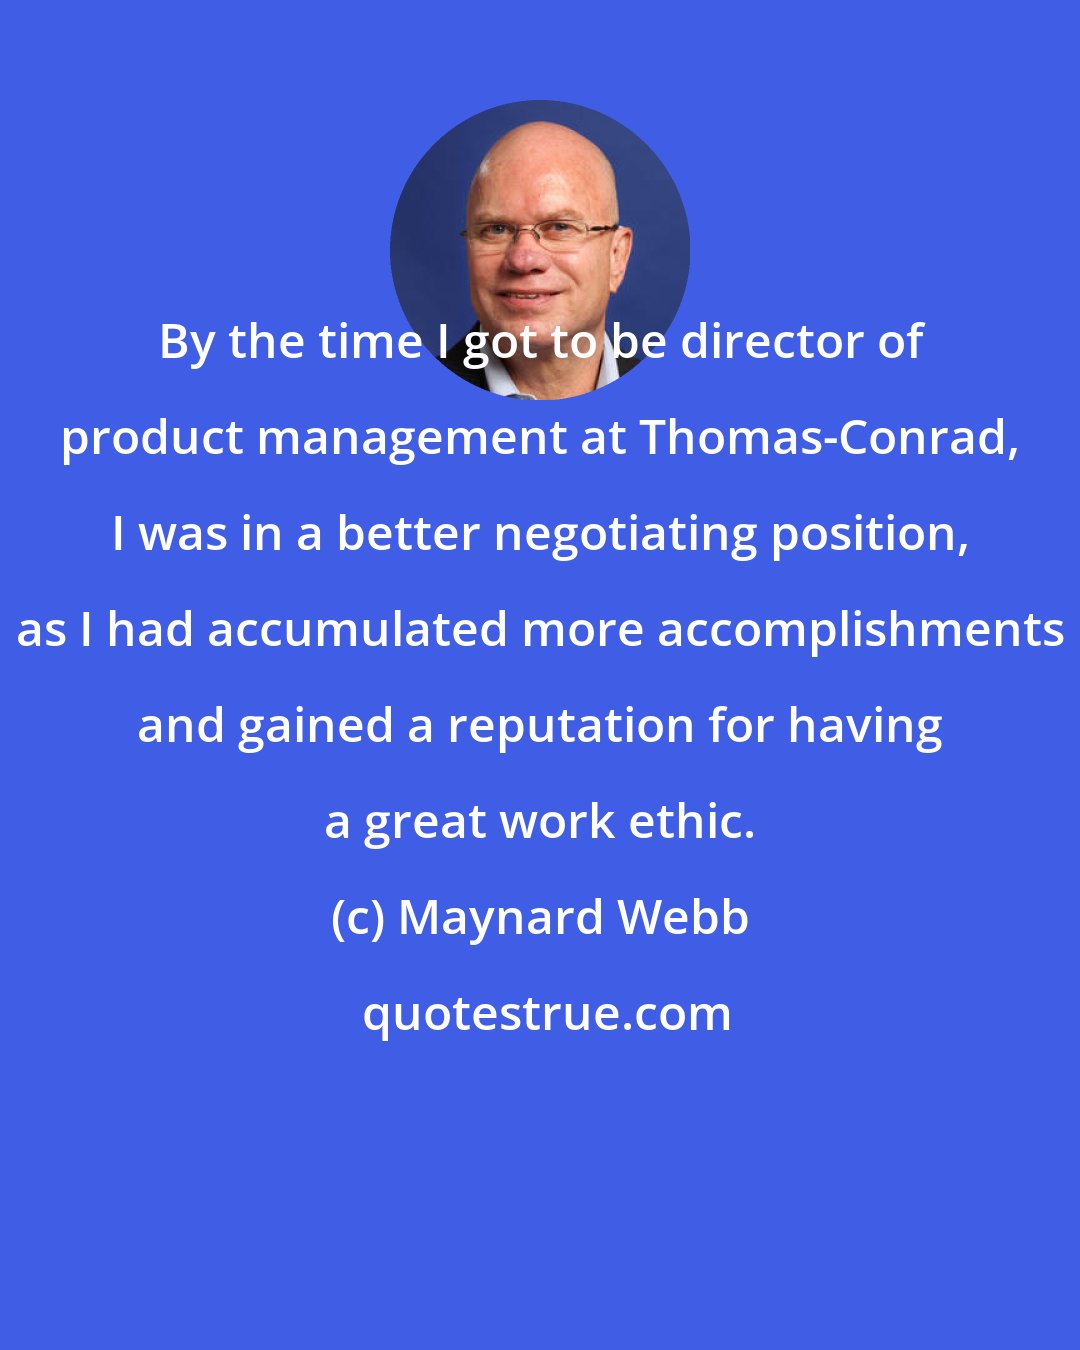 Maynard Webb: By the time I got to be director of product management at Thomas-Conrad, I was in a better negotiating position, as I had accumulated more accomplishments and gained a reputation for having a great work ethic.